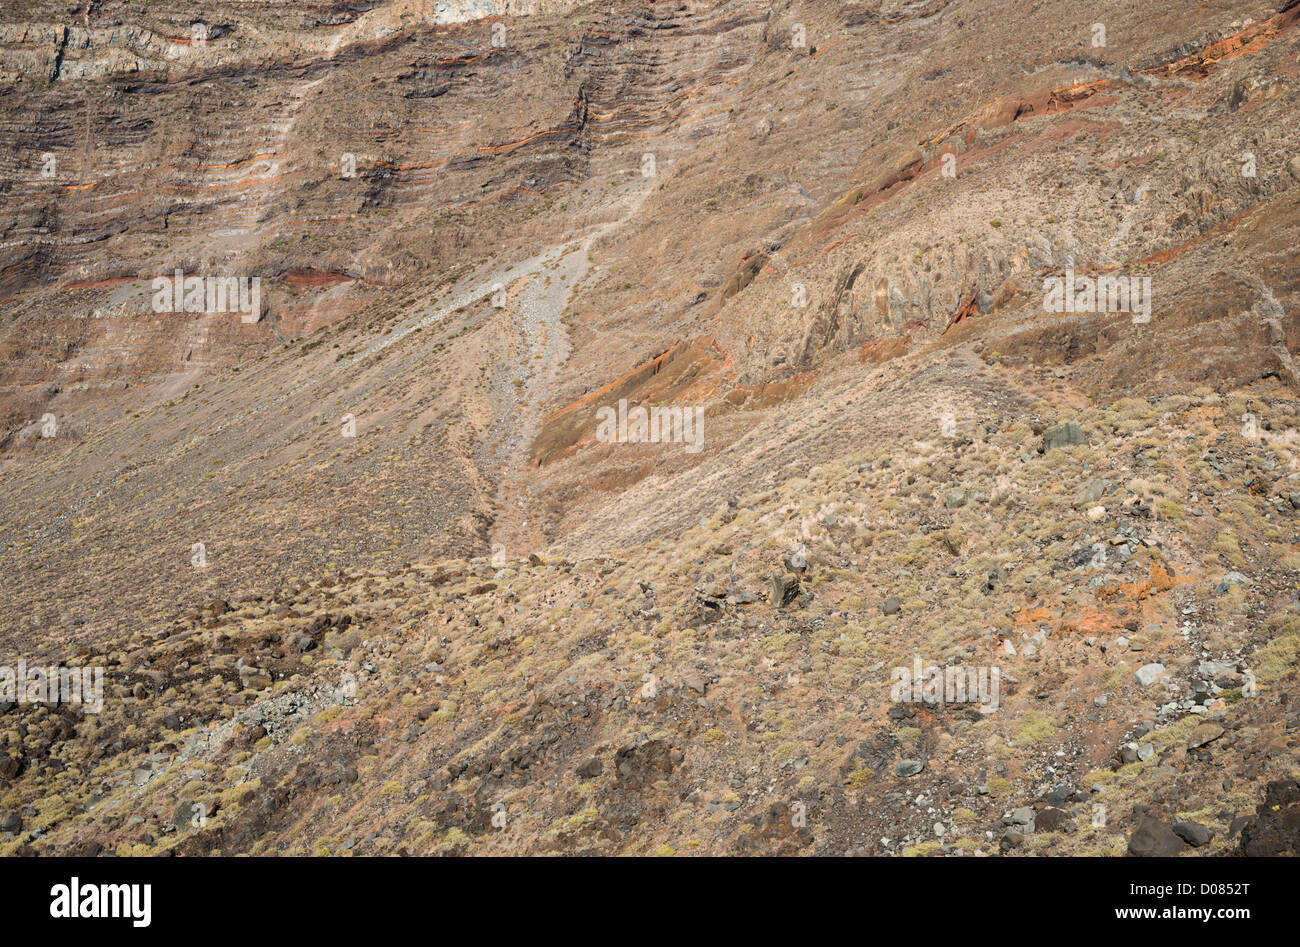 A section of the massive cliff (more than 1 km high) of the El Golfo embayment, Las Puntas, El Hierro, Canary Islands, Spain Stock Photo